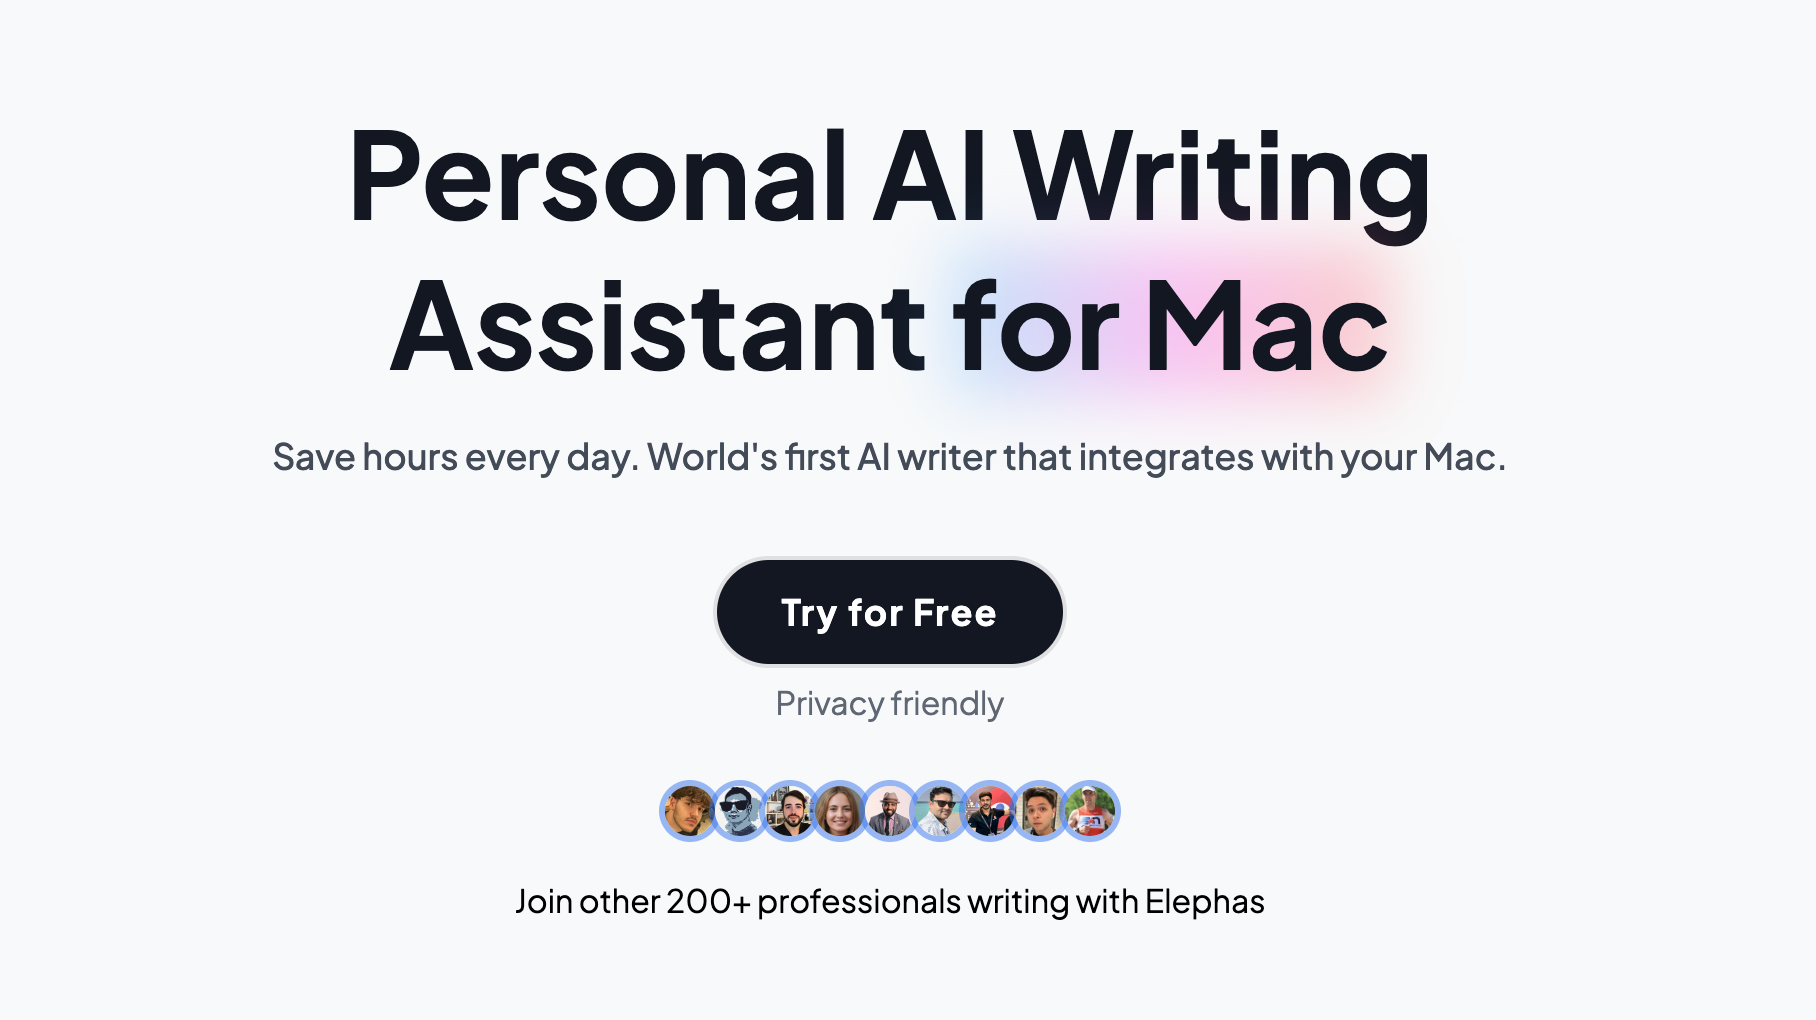 Elephas - Personal AI Writing Assistant for Mac